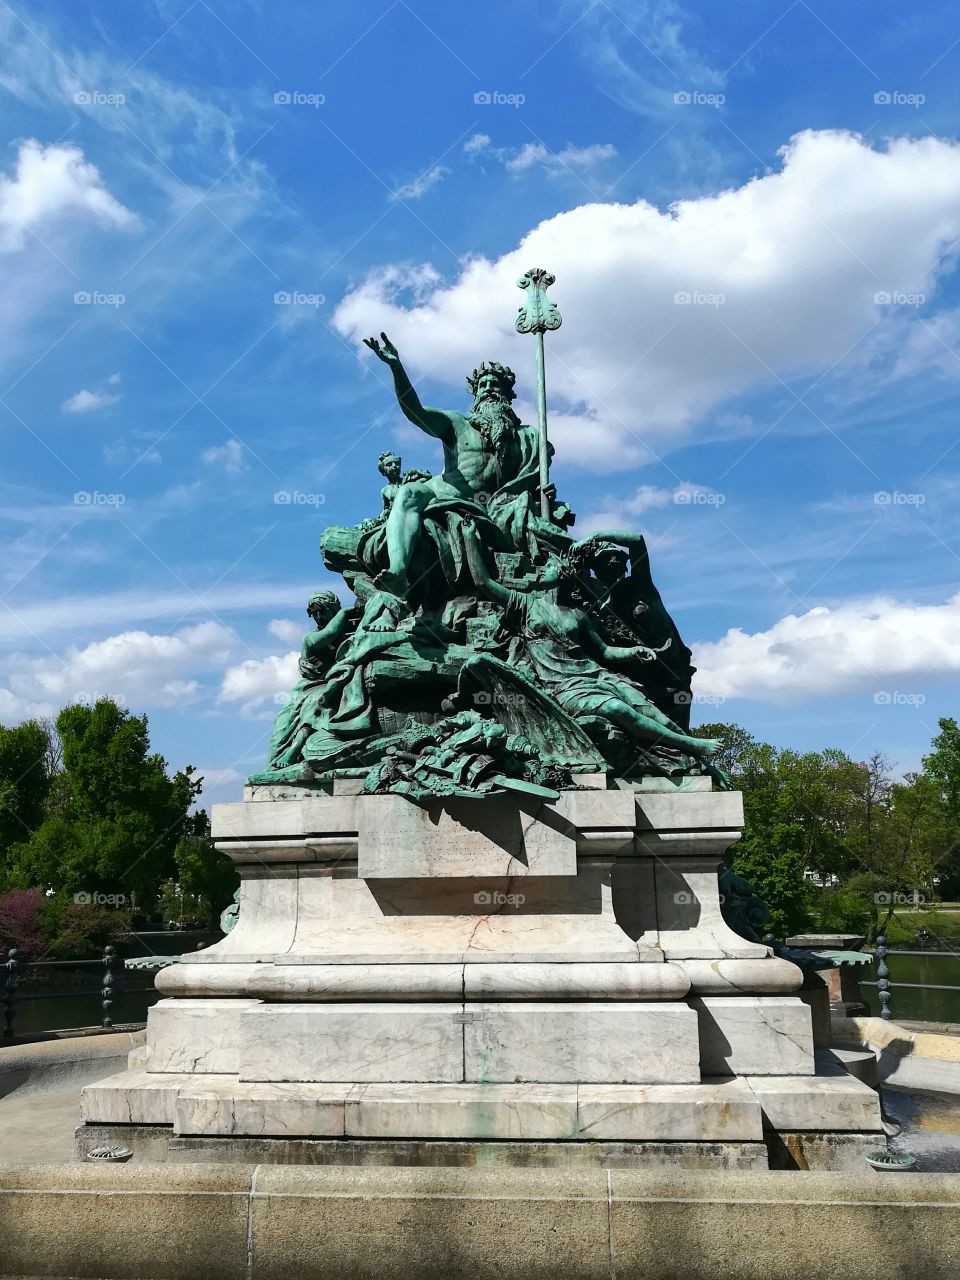 Fountain, Düsseldorf. Father Rhine with his daughters